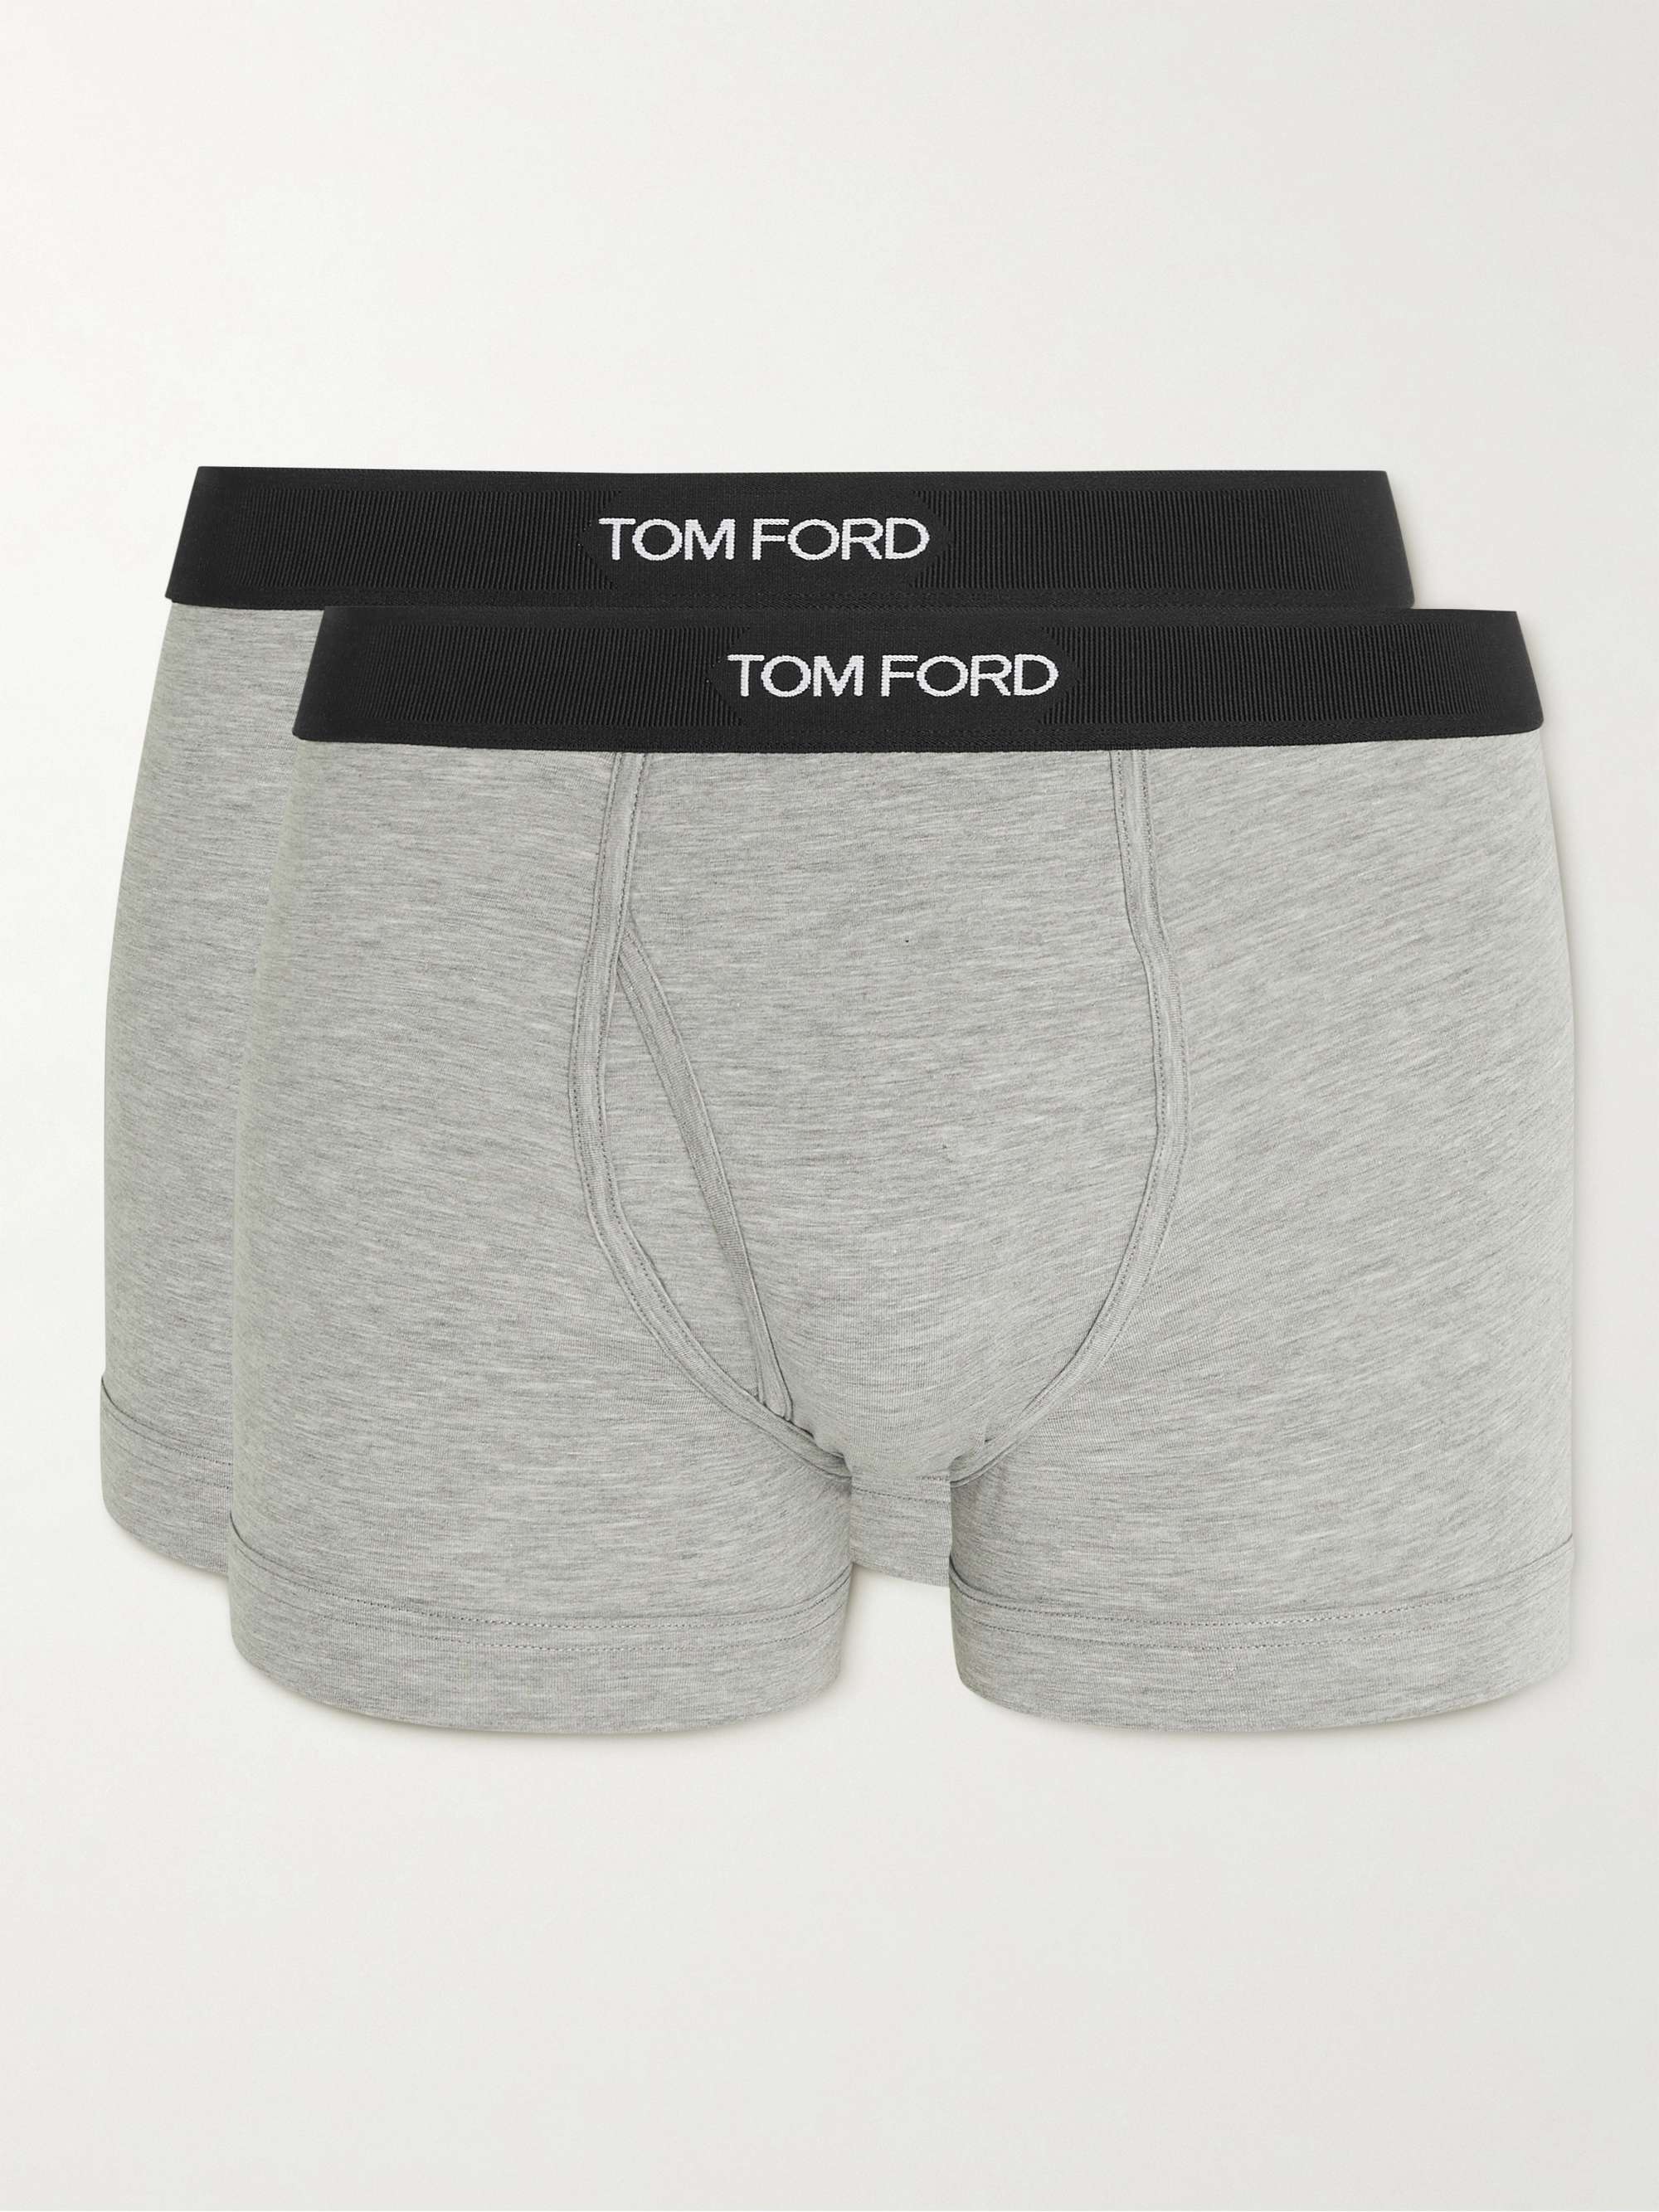 for Men Mens Clothing Underwear Boxers briefs Grey Save 9% Tom Ford Cotton Two-pack Logo Waistband Briefs in Grey 